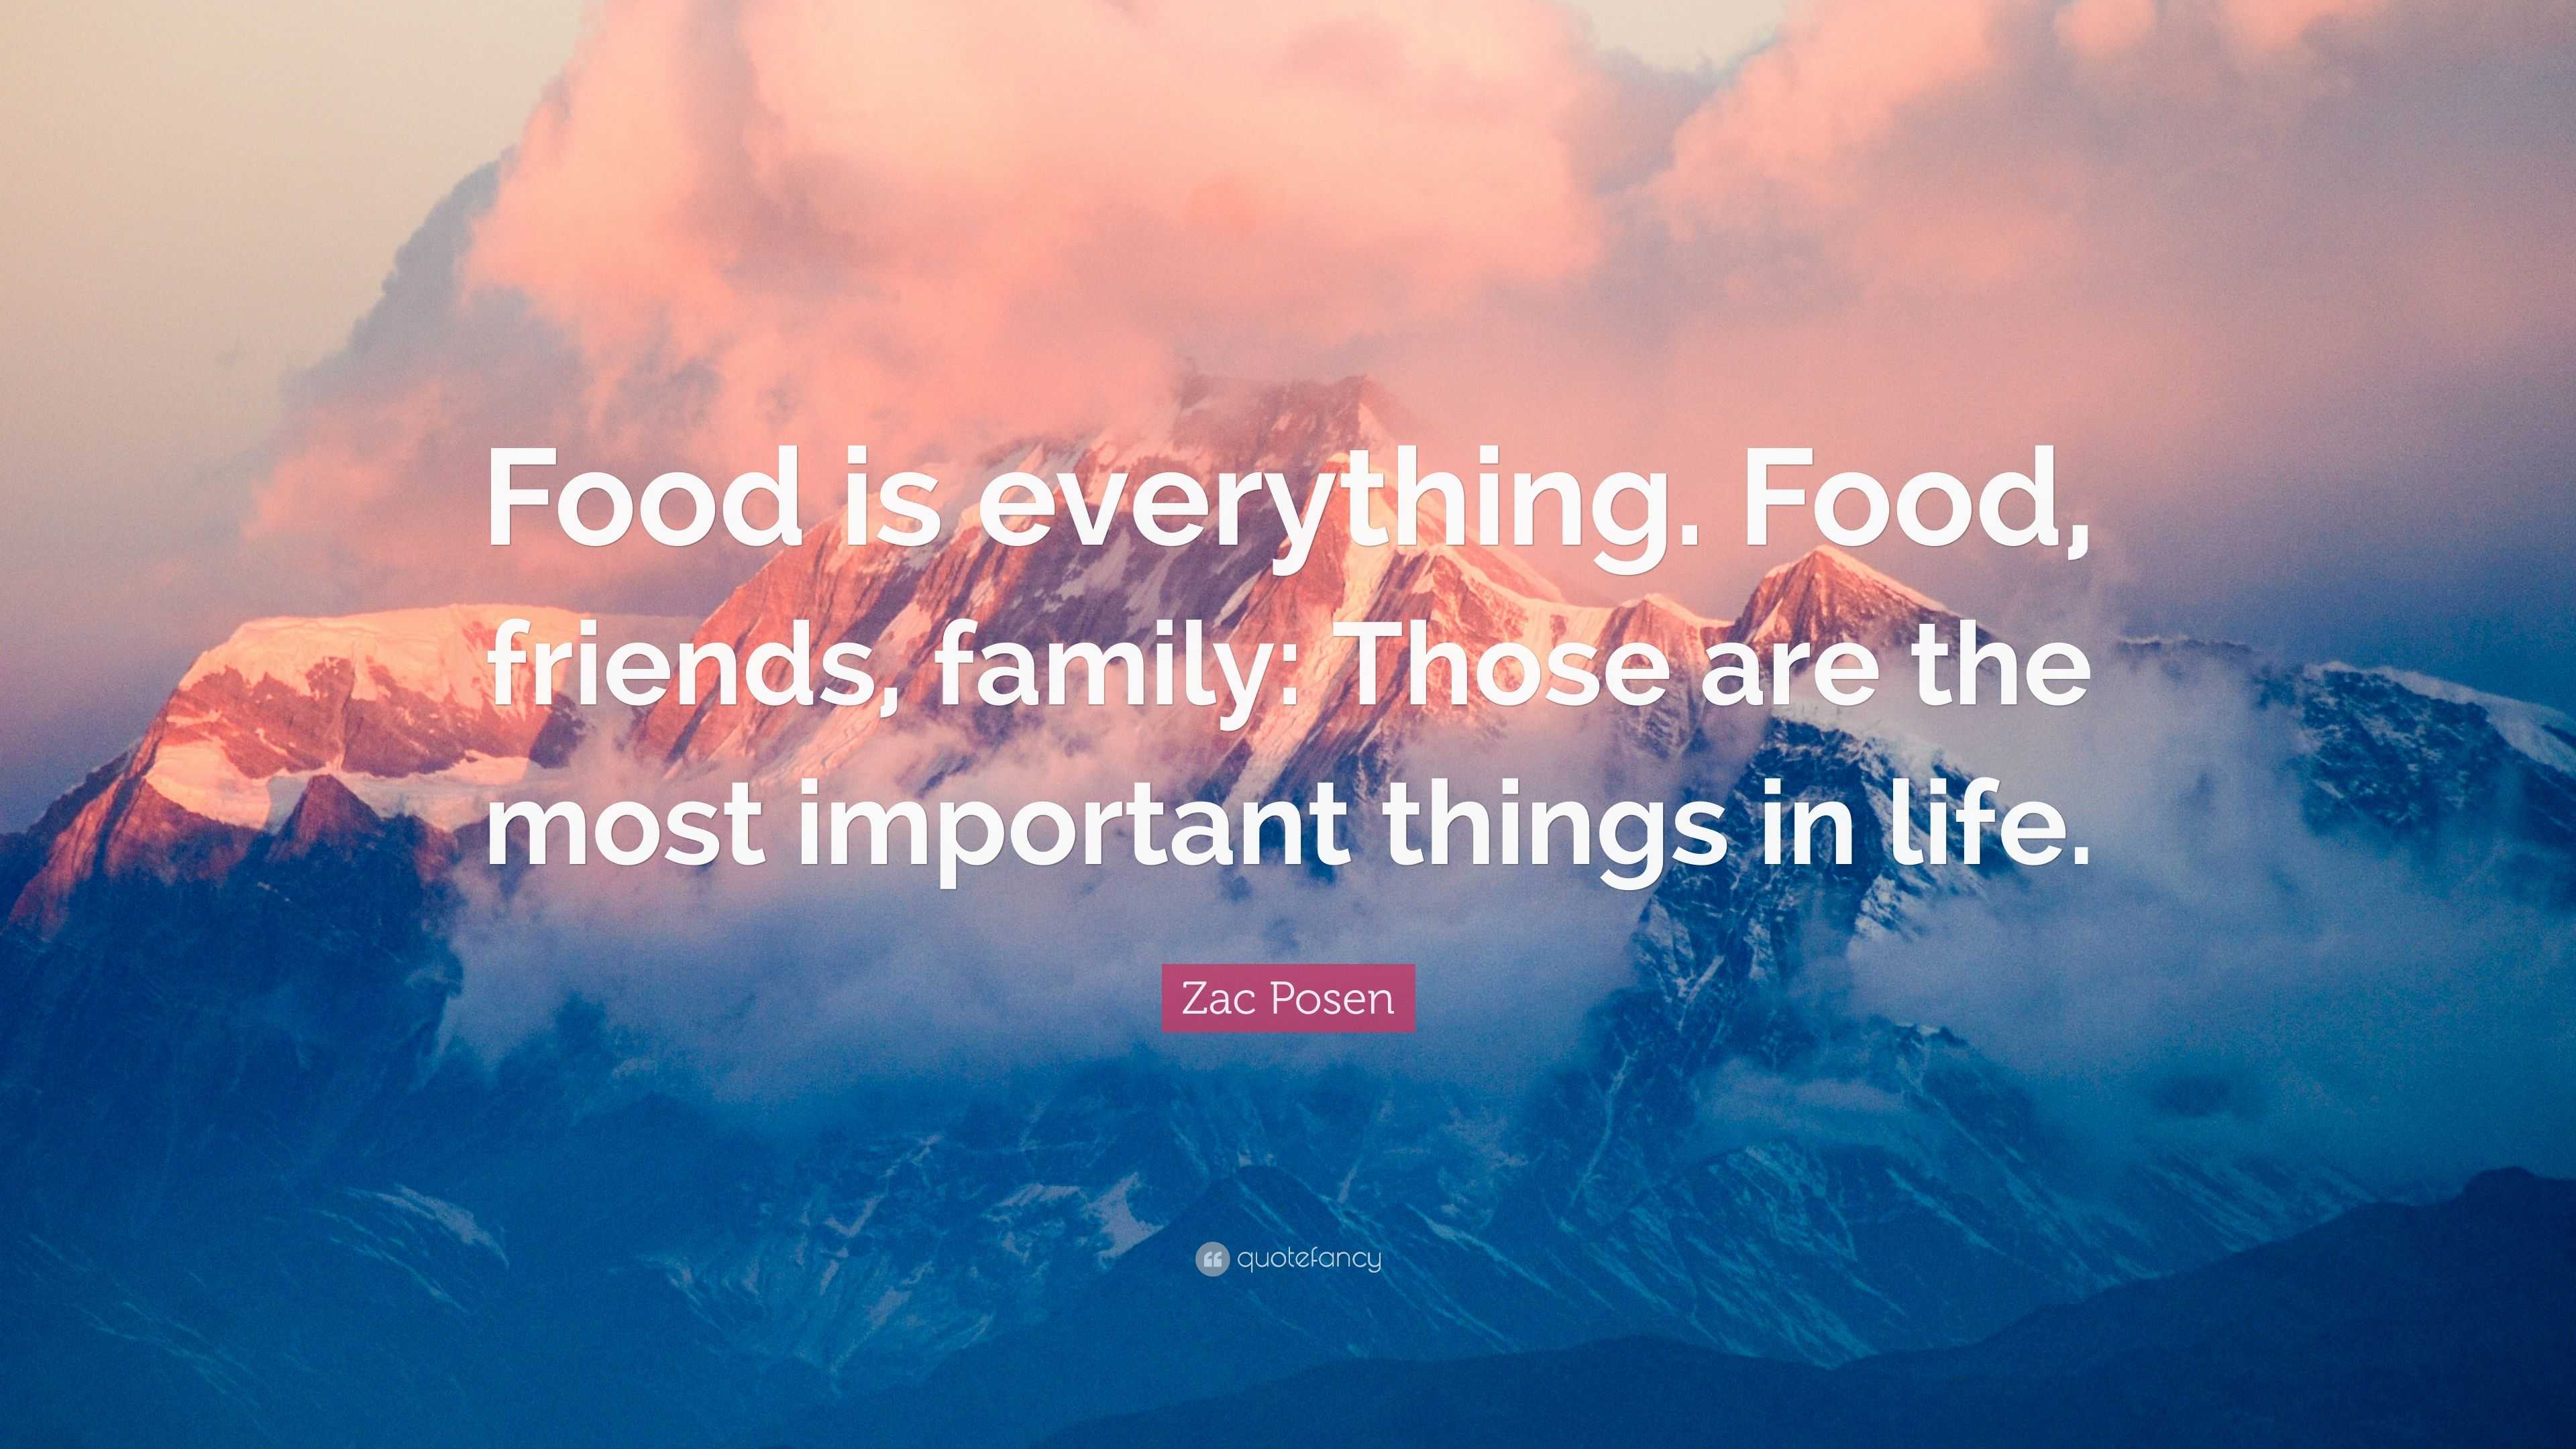 Zac Posen Quote: “Food is everything. Food, friends, family: Those are